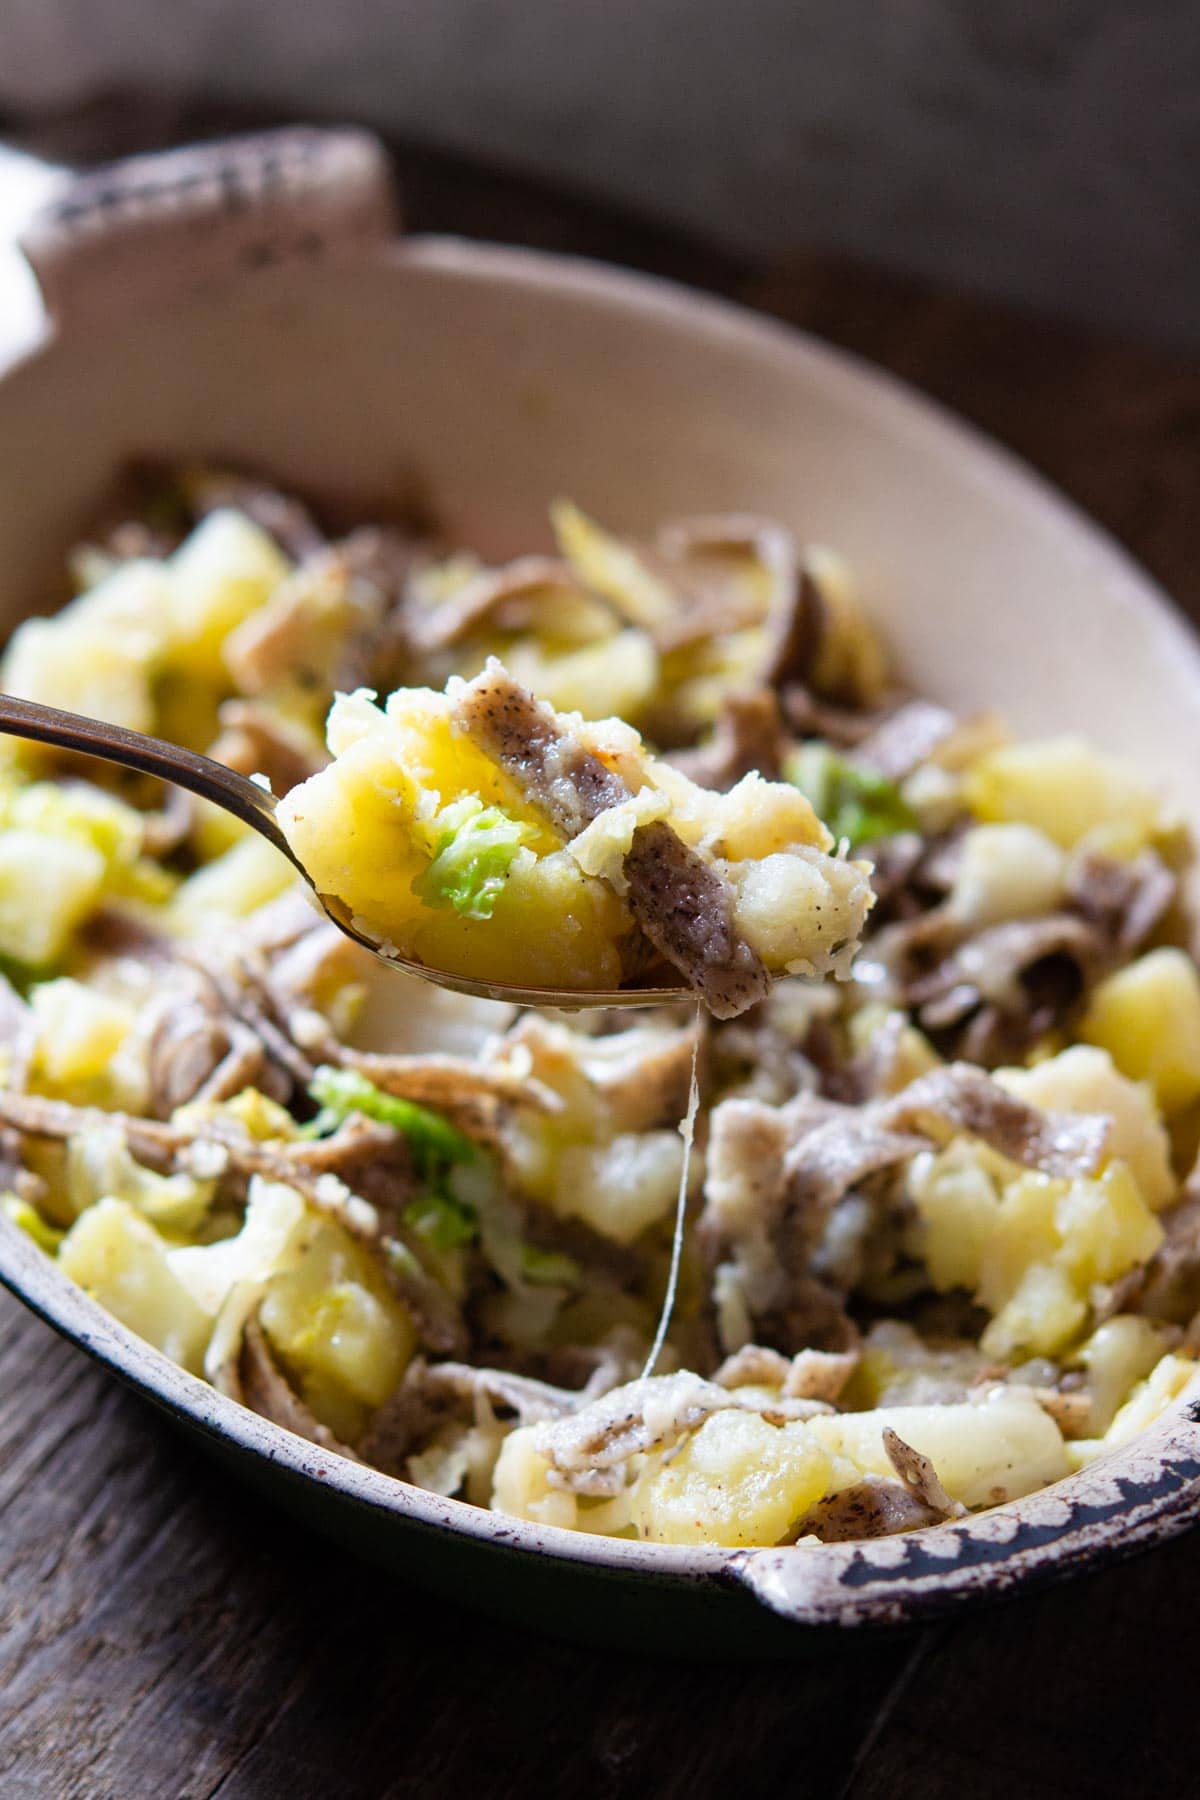 A close up of a spoonful of pizzoccheri pasta with potatoes, cabbage and cheese